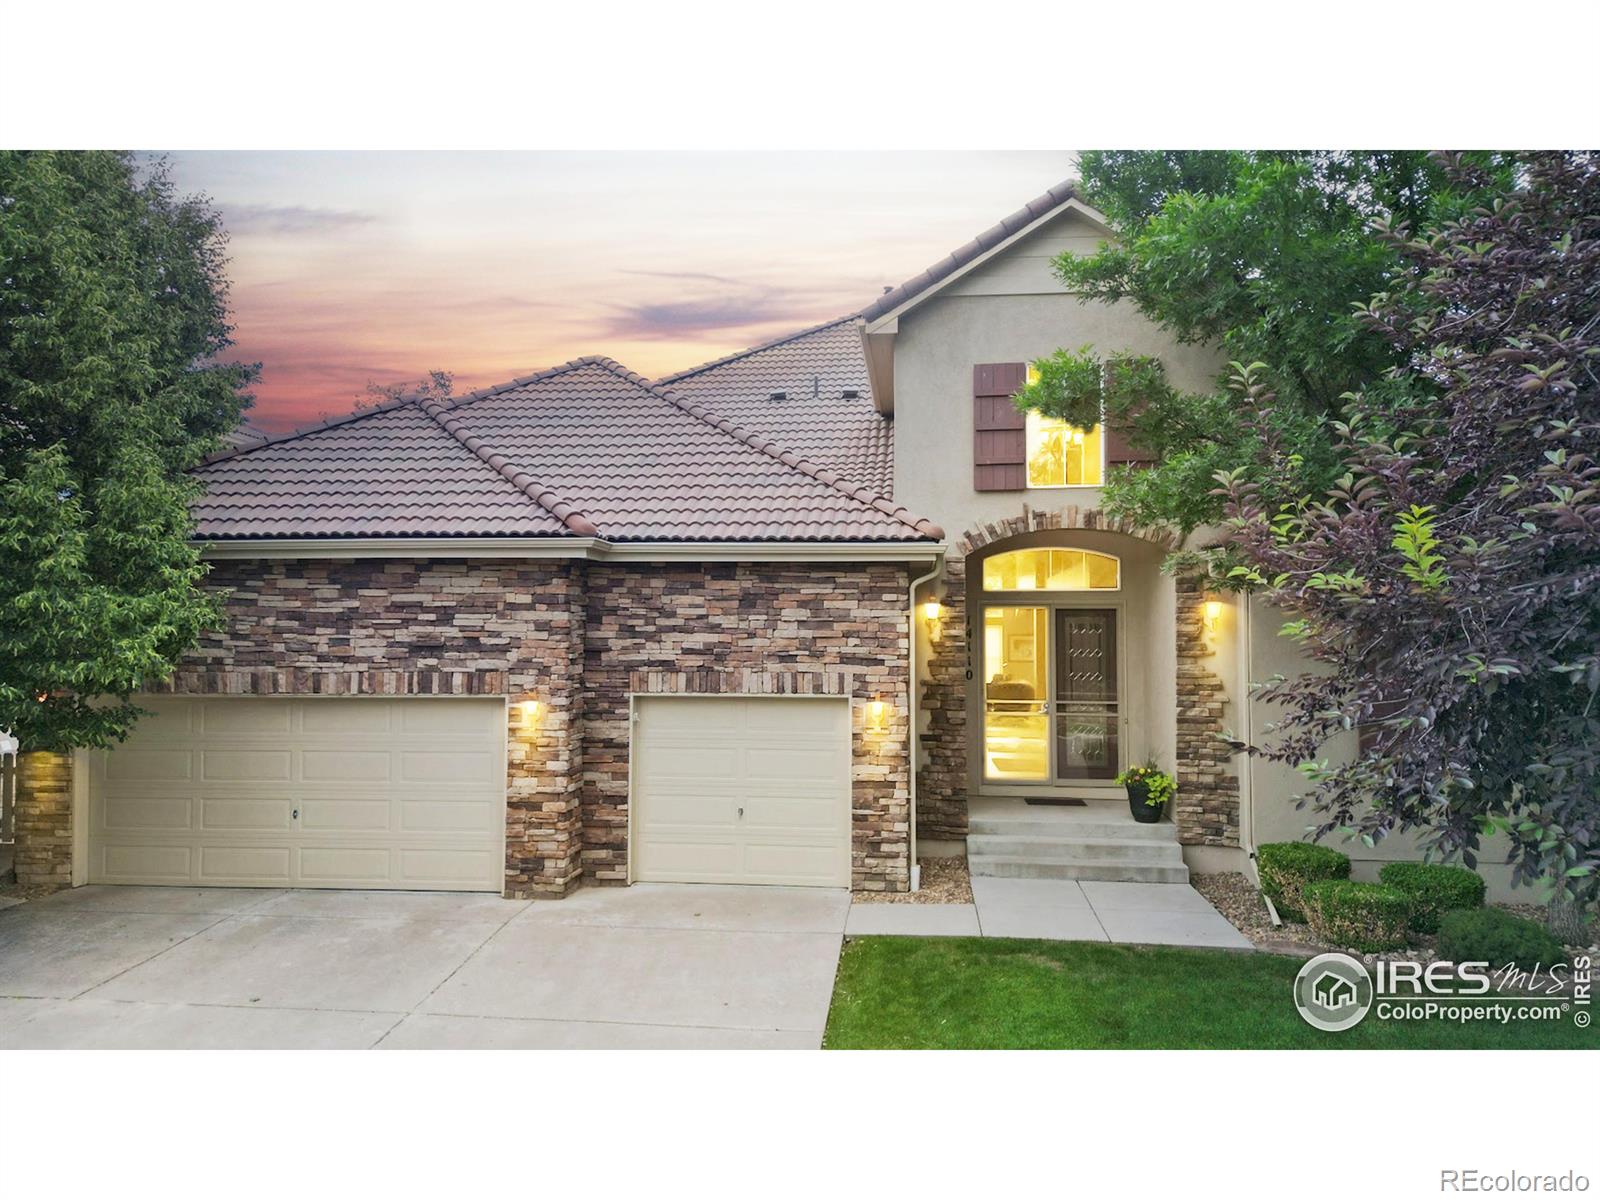 14110  Kahler Place, broomfield MLS: 456789994521 Beds: 5 Baths: 4 Price: $1,095,000